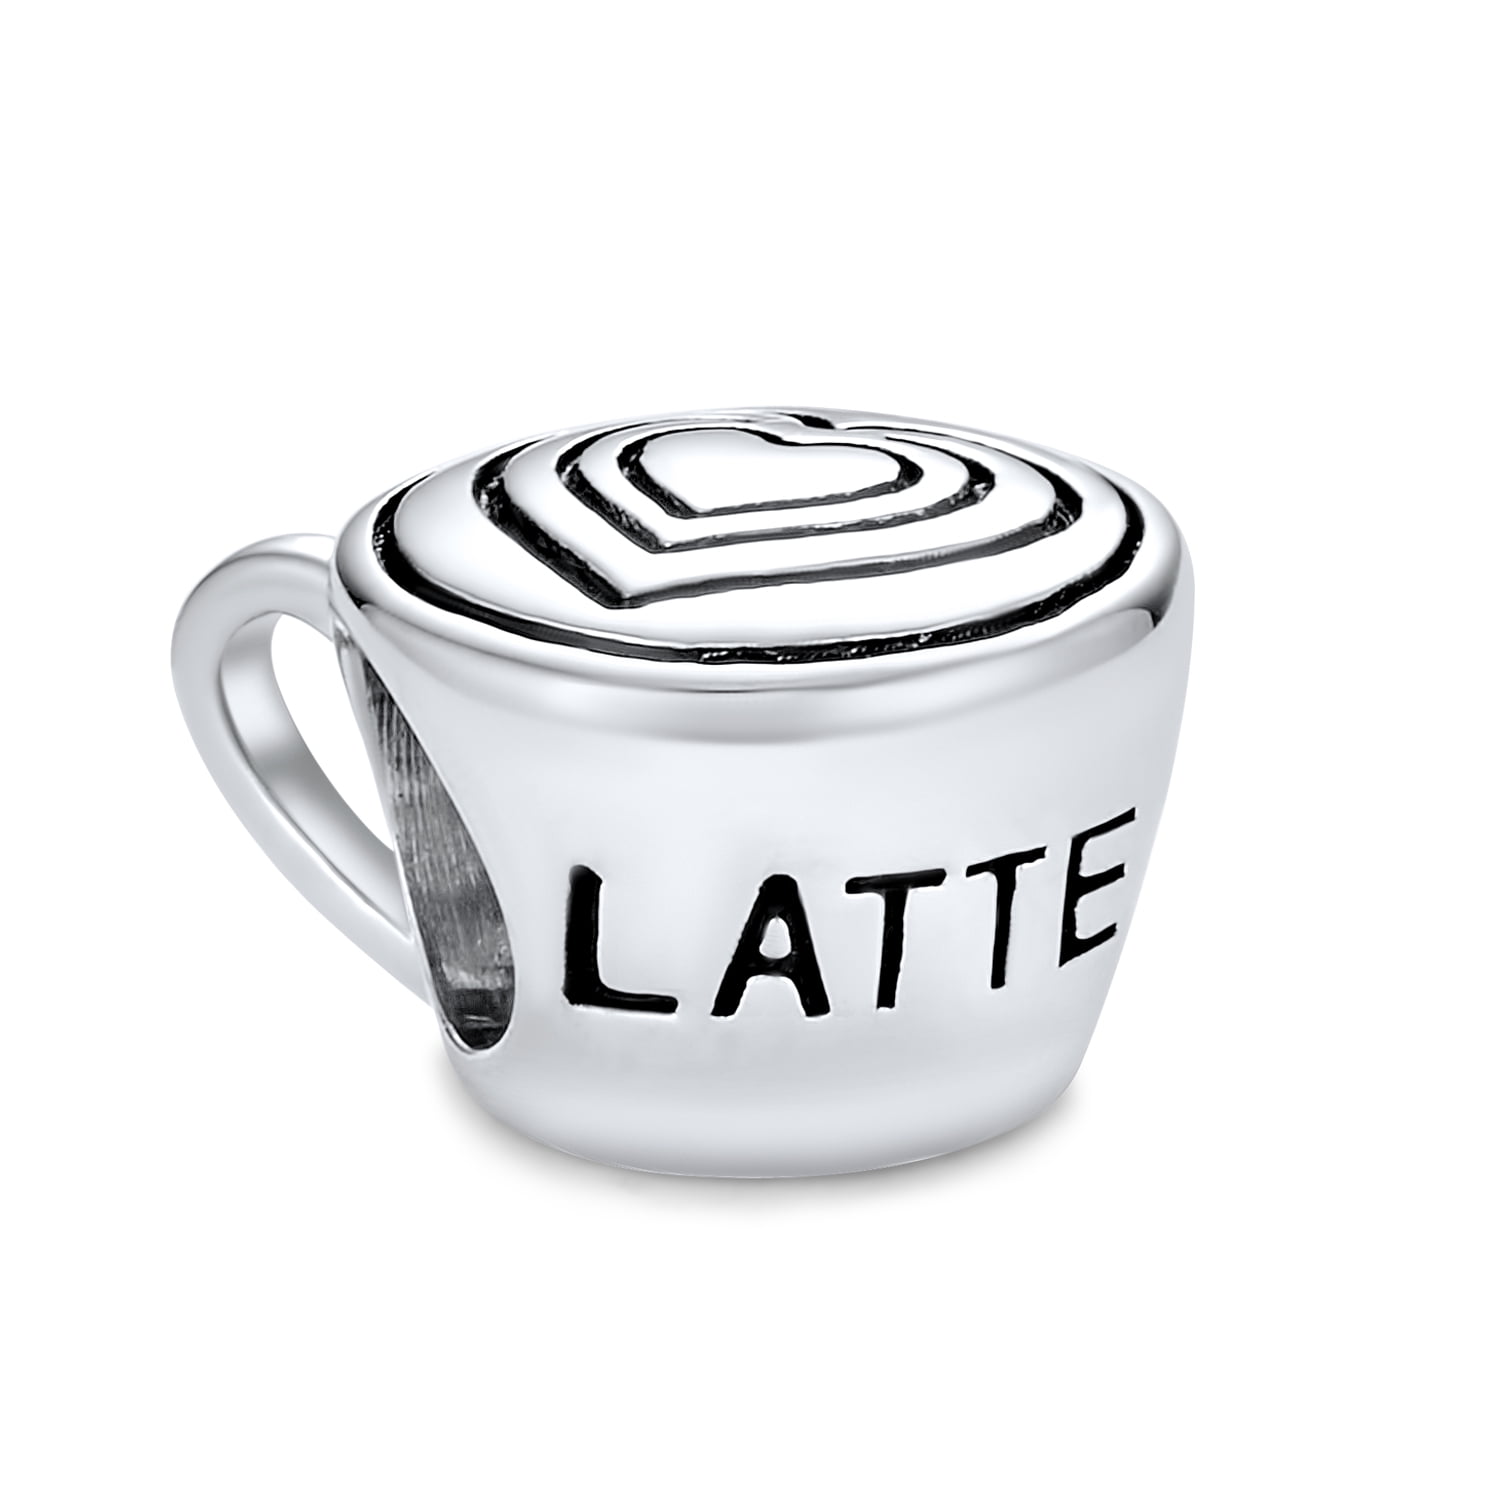 Coffee Lover Cup Latte Travel Mug Charm Bead For Women For Teen 925 Sterling Silver Fits European Charm Bracelet 